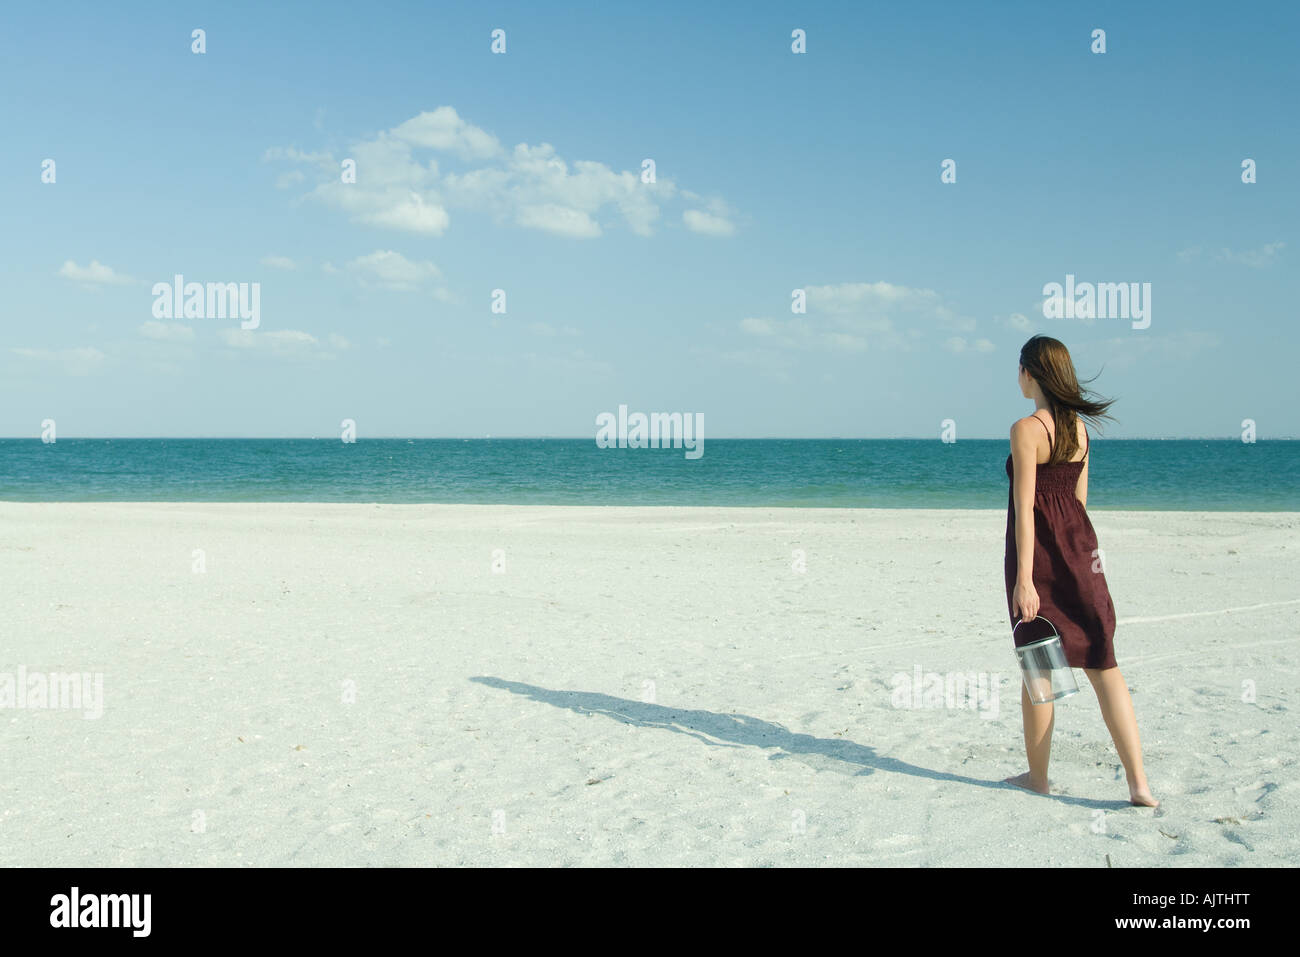 Woman walking across beach, carrying transparent container, full length, rear view Stock Photo